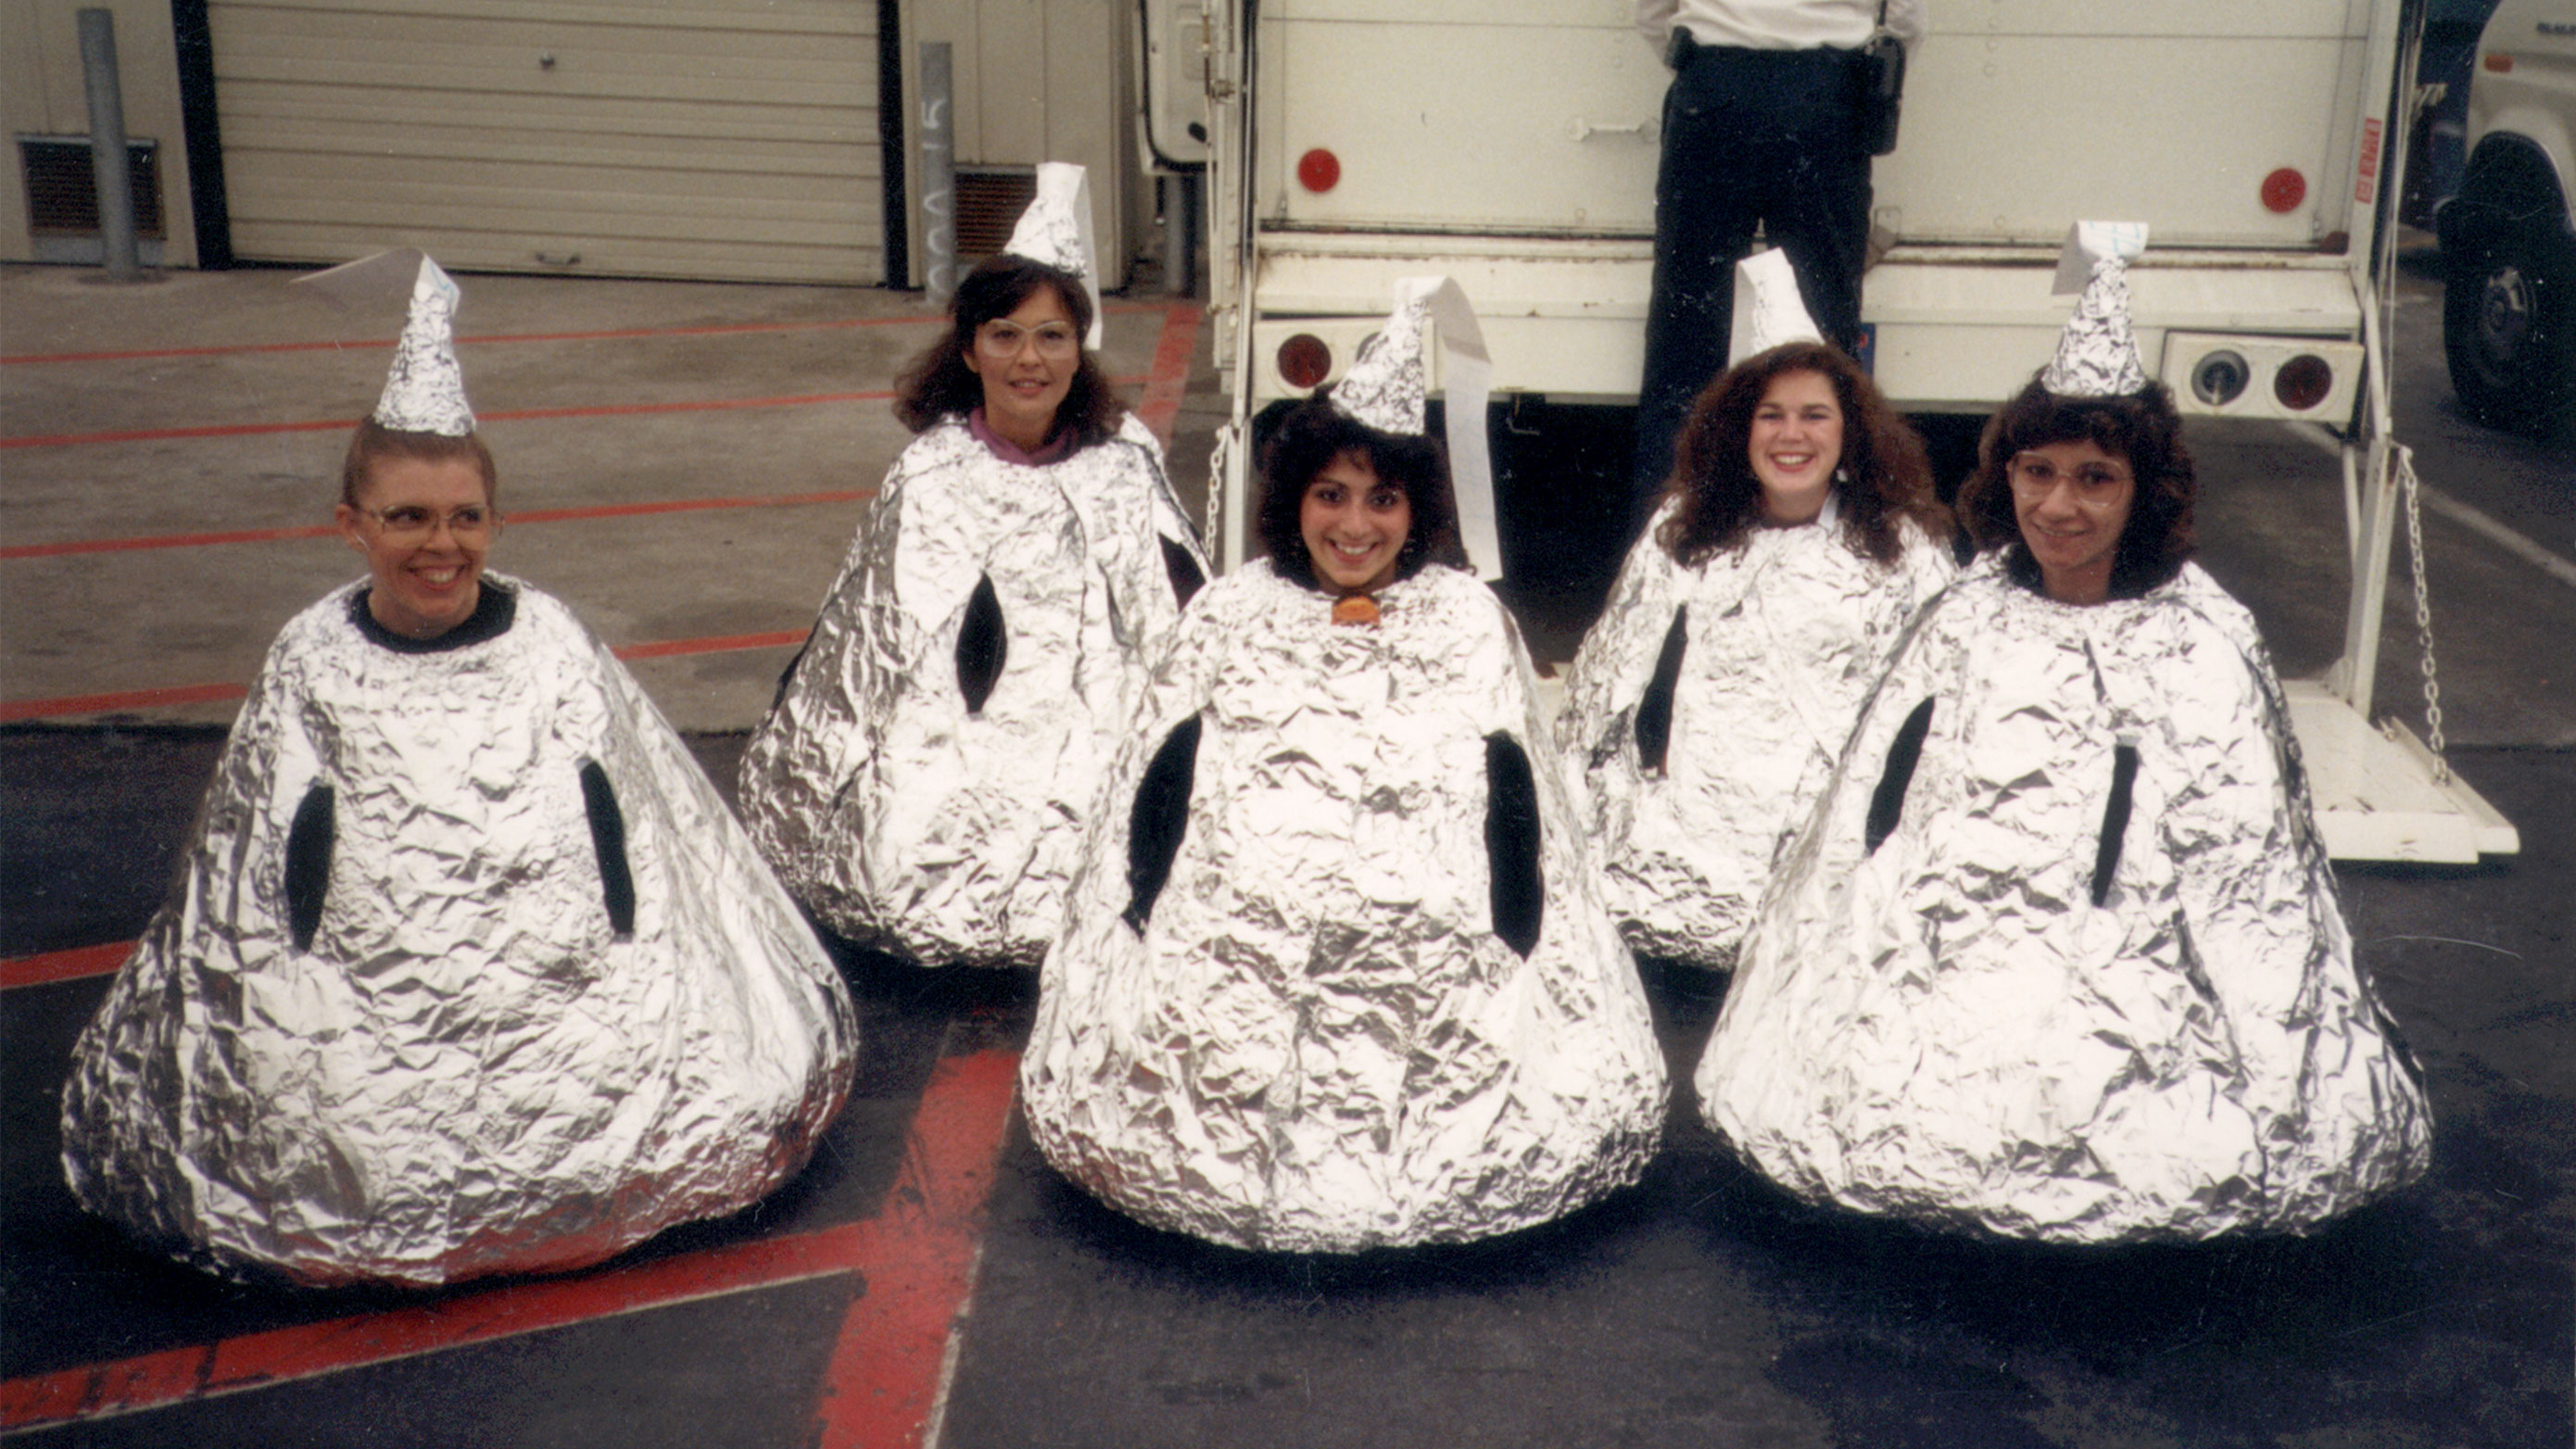 1989 Halloween Ho-Ho with security personnel dressed as Hershey kisses. Photo courtesy of Sandy Smith (pictured alongside Carol Nellen, Tamara Rusher and Kathy Vega).